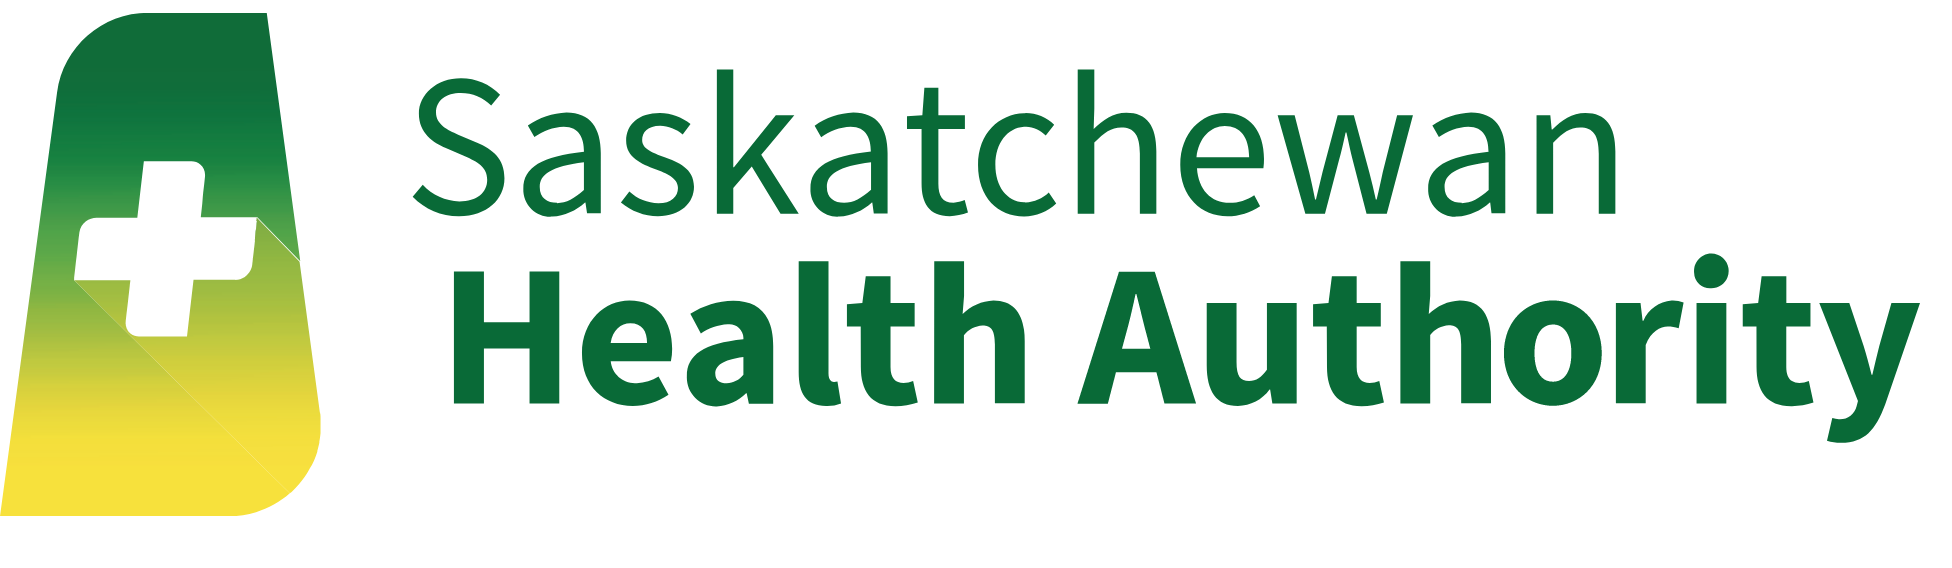 SHA Logo. A green-to-yellow gradient of Saskatchewan with a white medical cross in the middle. Saskatchewan Health Authority is written in green to the right.